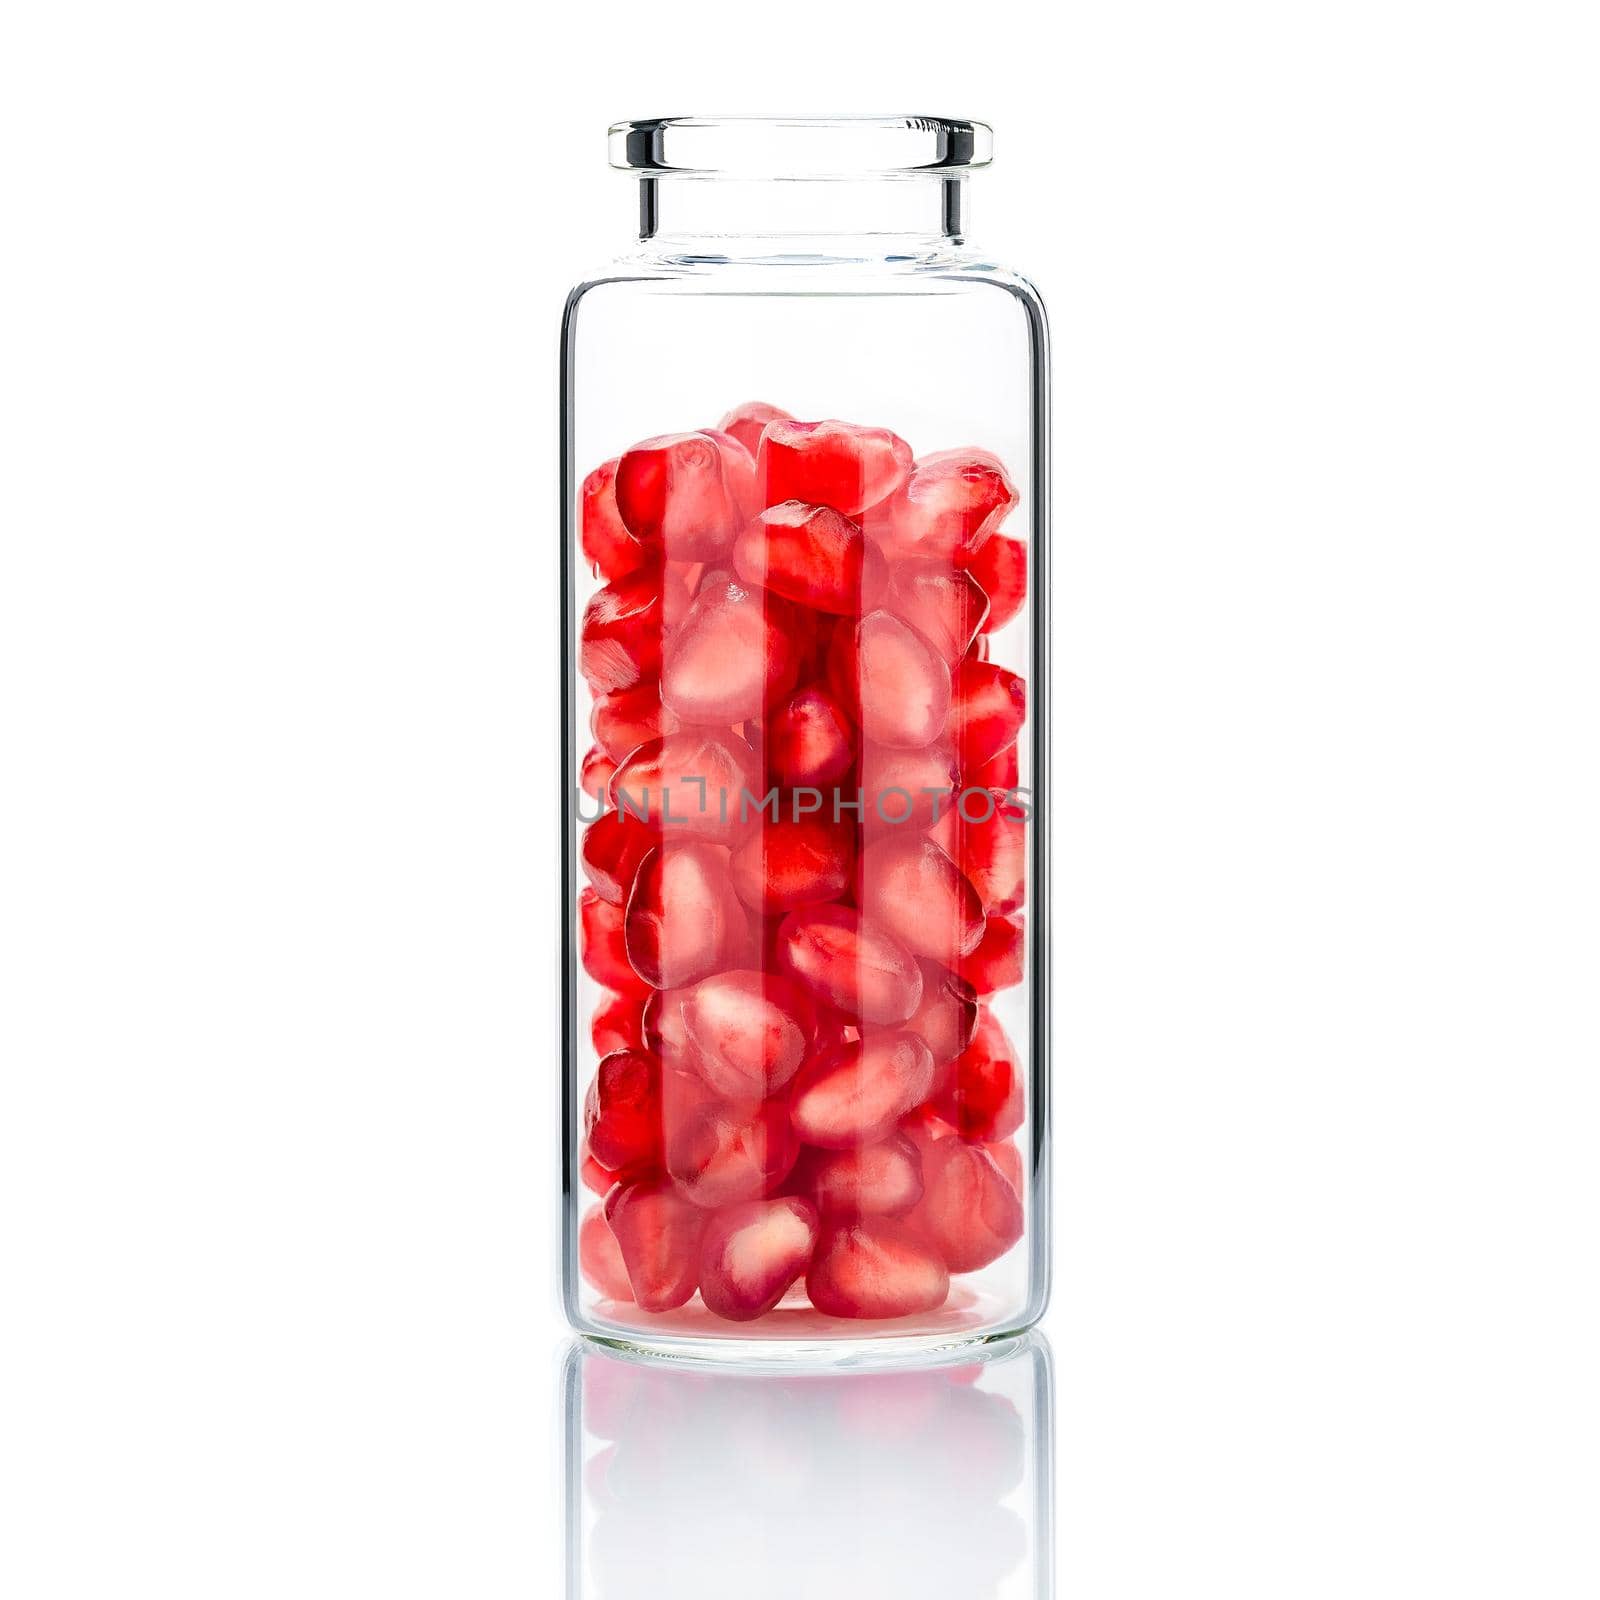  Homemade skin care with pomegranate seeds in a glass bottle  isolate on white background.